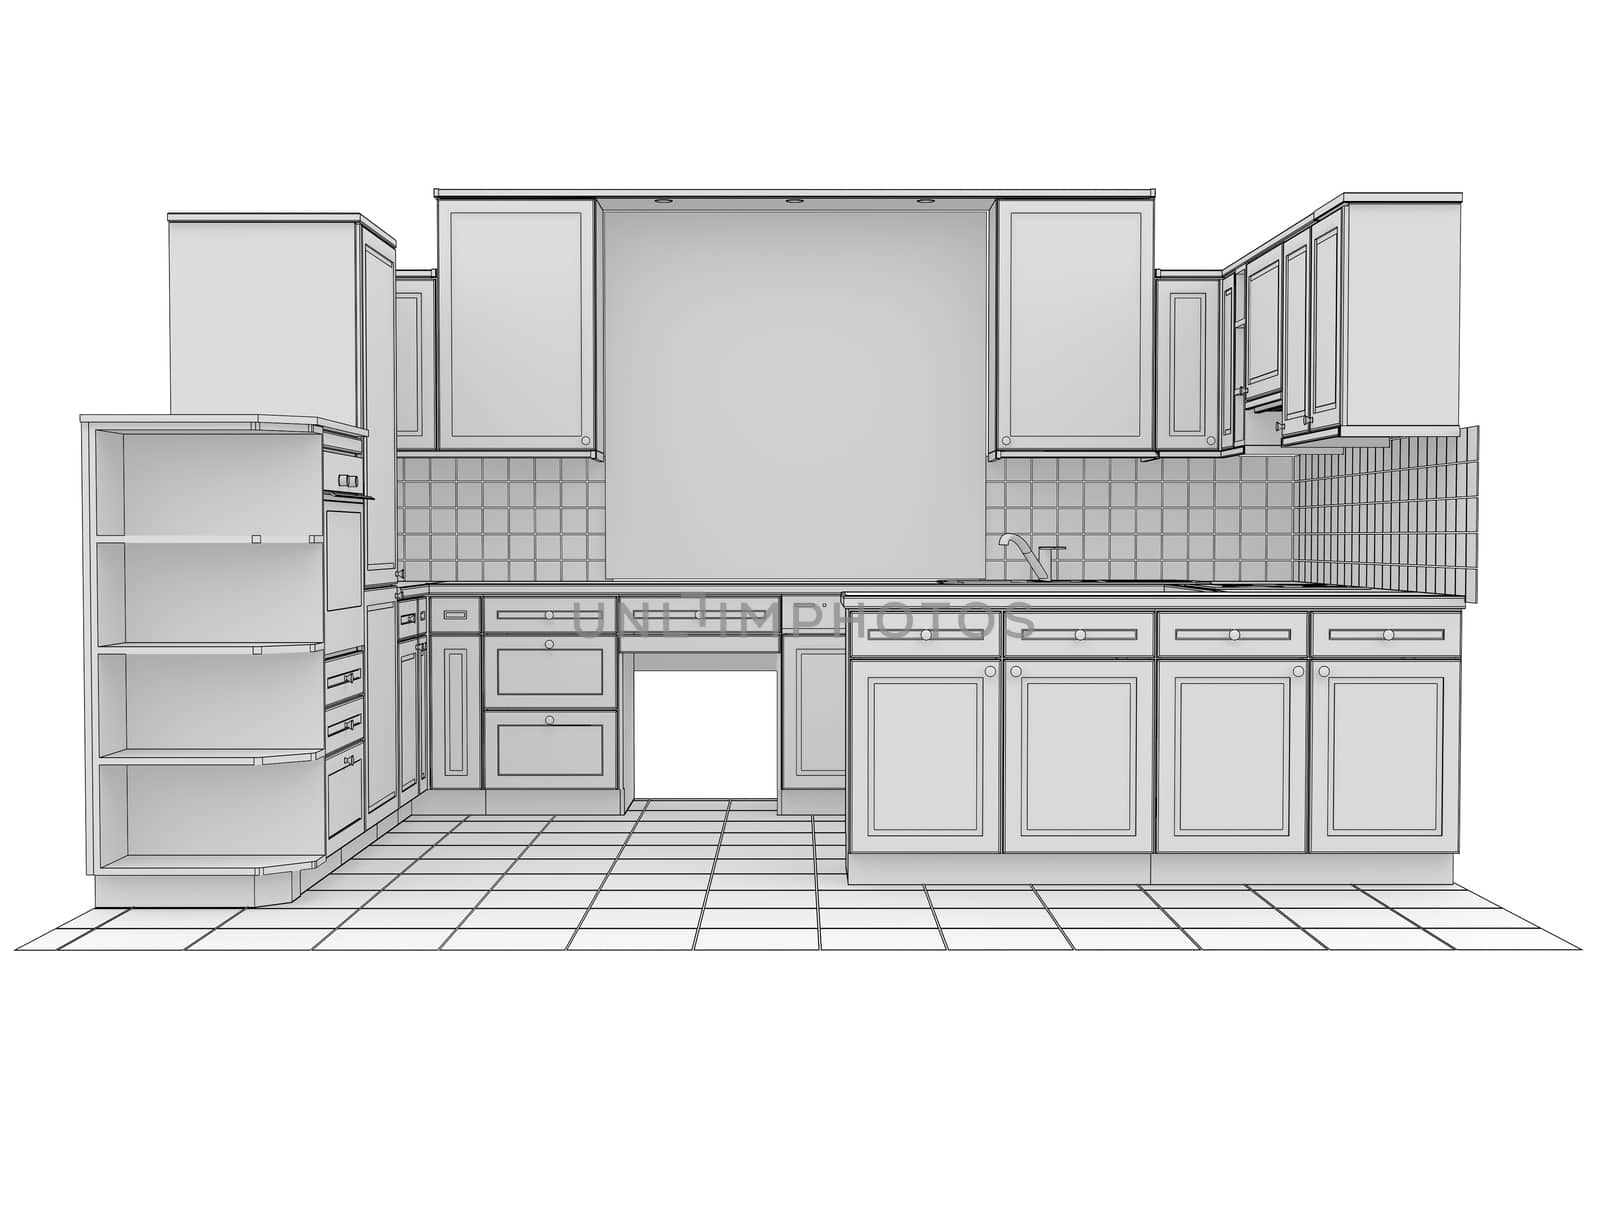 Kitchen rendered by lines. Isolated render on a white background